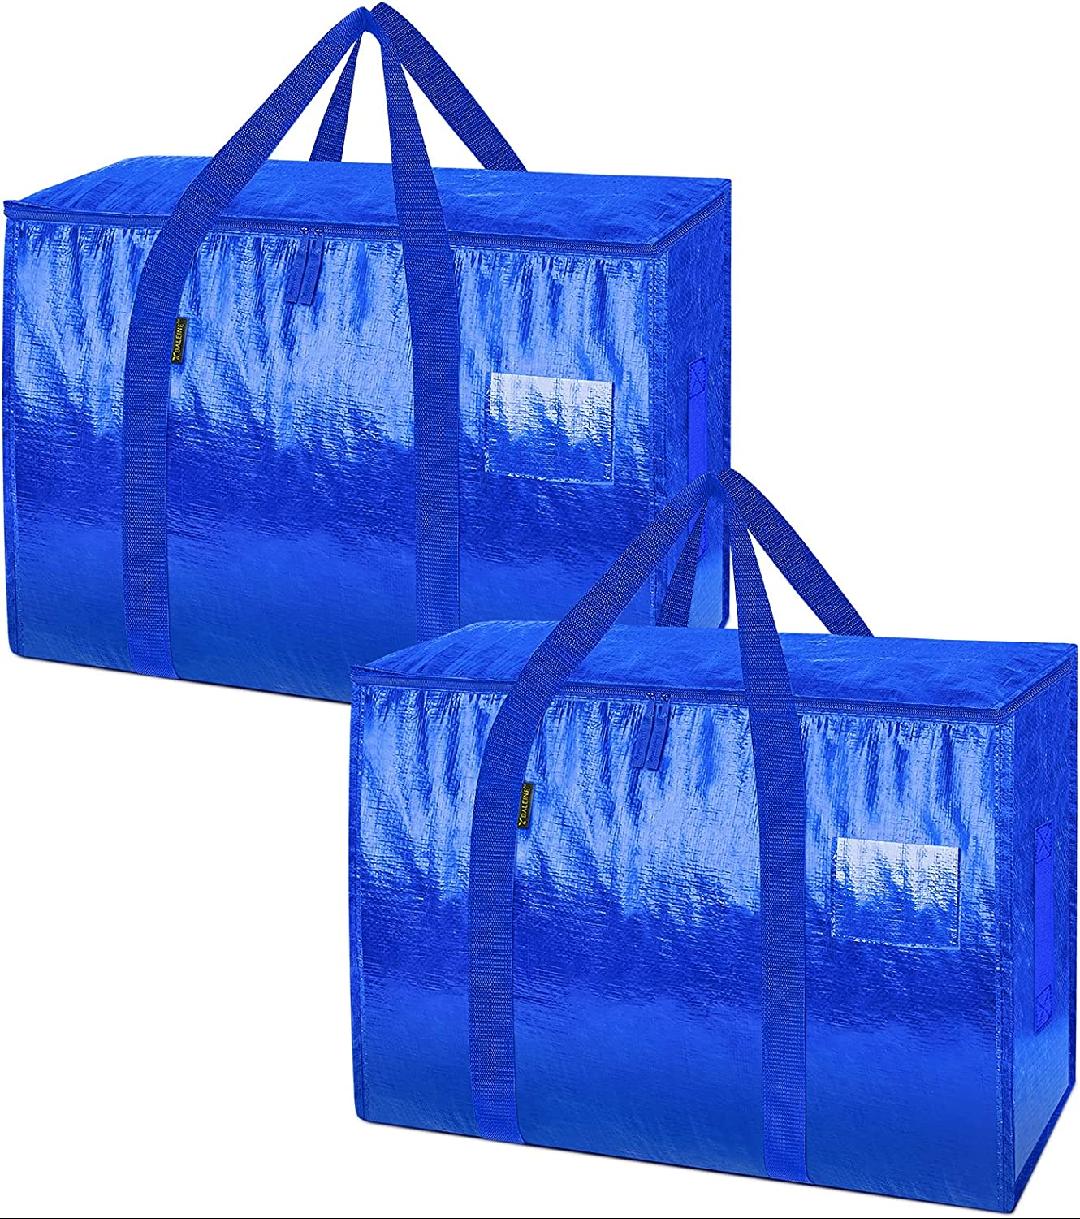 28 Gallon Moving Totes with Reinforced Handles, Heavy-Duty UnderBed Storage  Bag for Moving Boxes, Clothes, Travel, Attics (2 Pack, Blue)